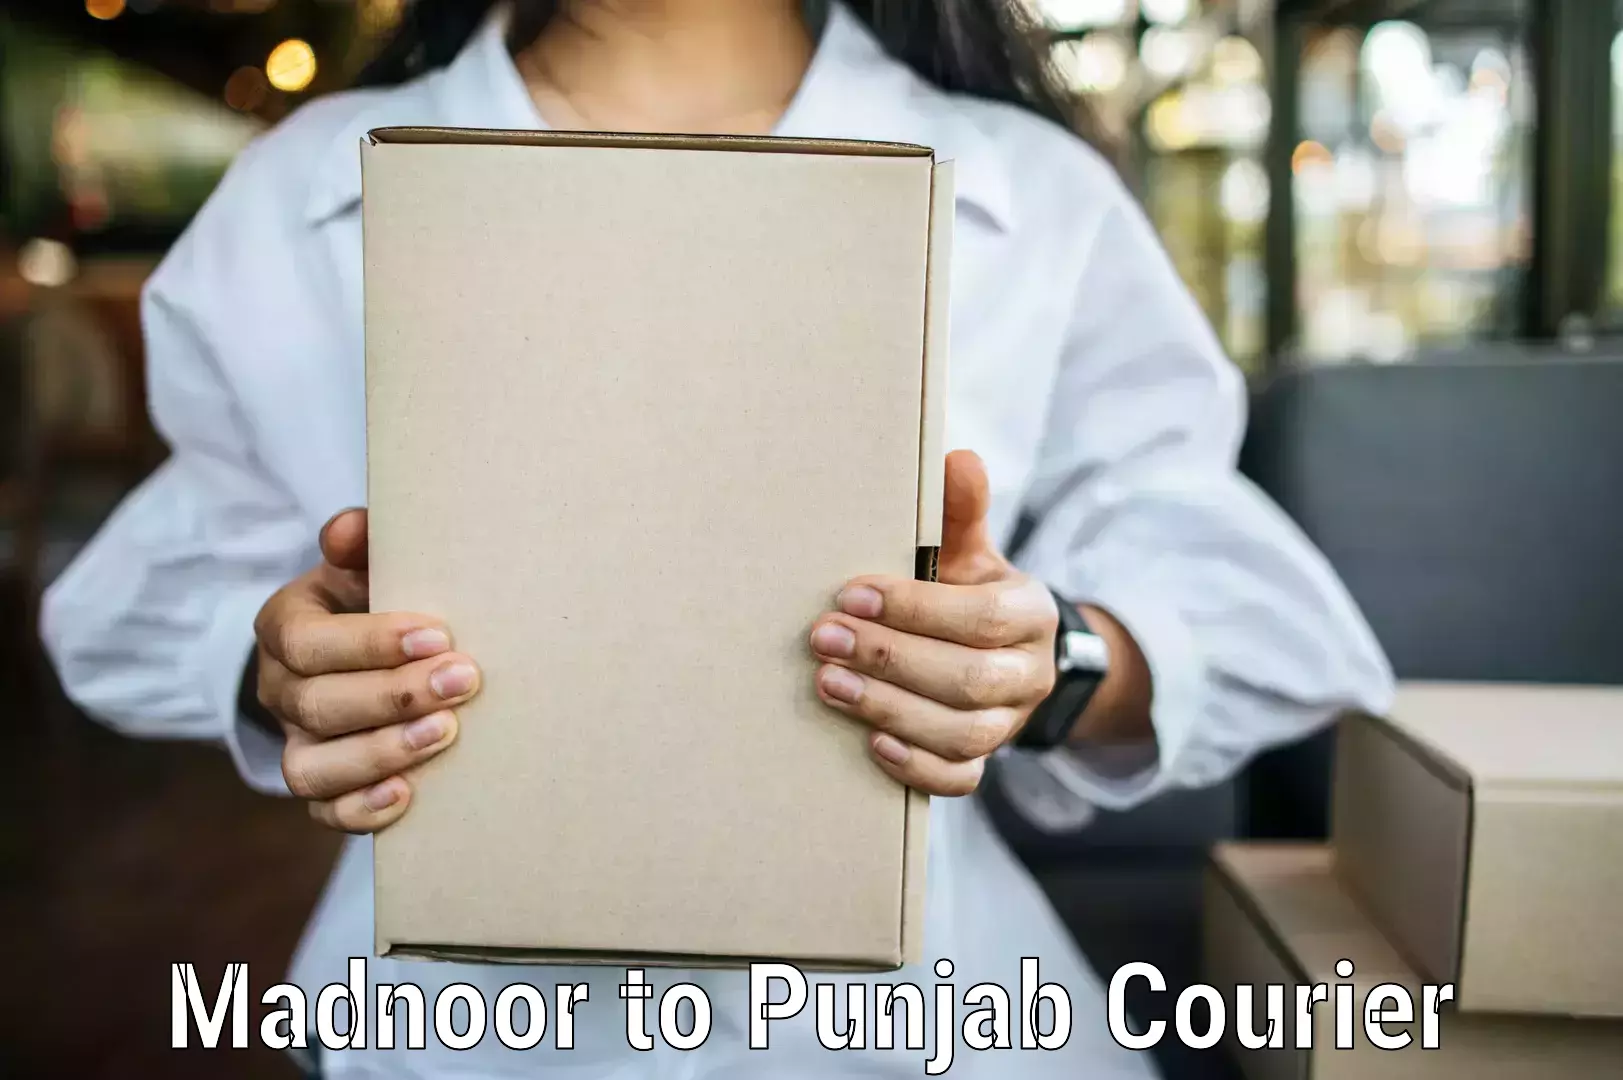 Courier service innovation Madnoor to Thapar Institute of Engineering and Technology Patiala